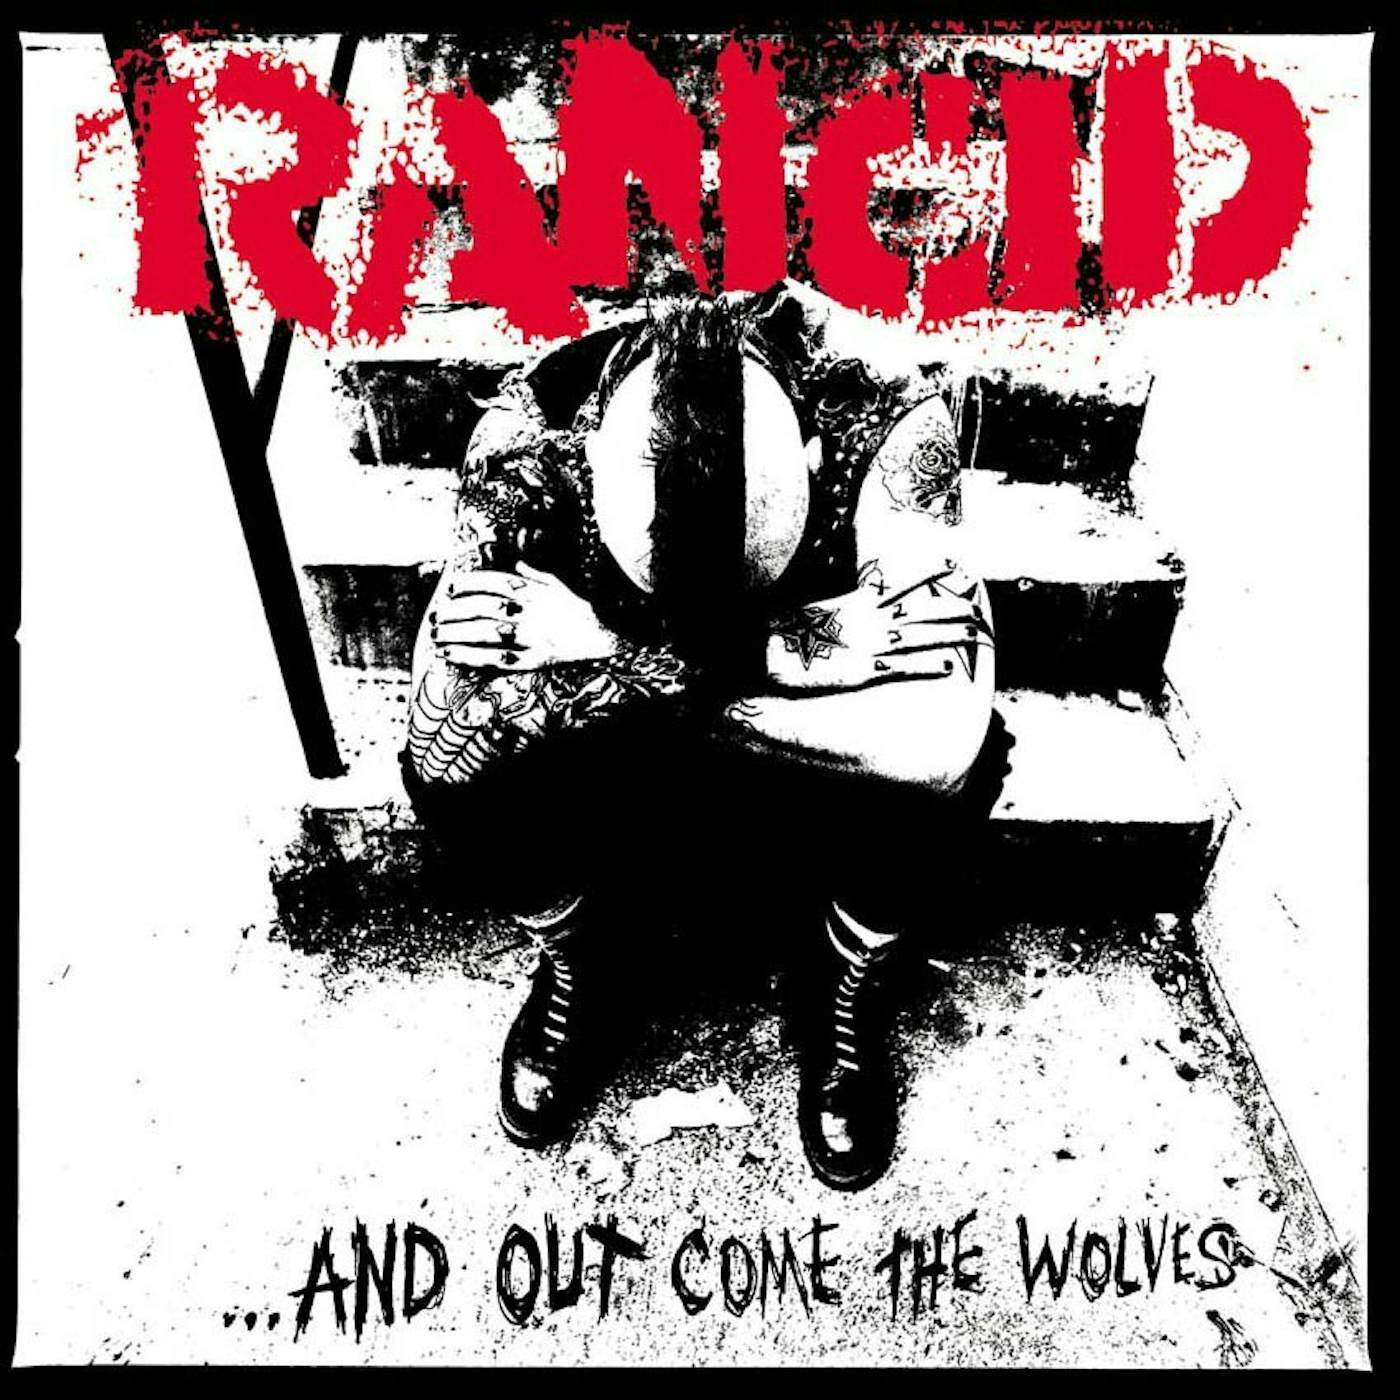 Rancid & Out Come The Wolves (Black) Vinyl Record